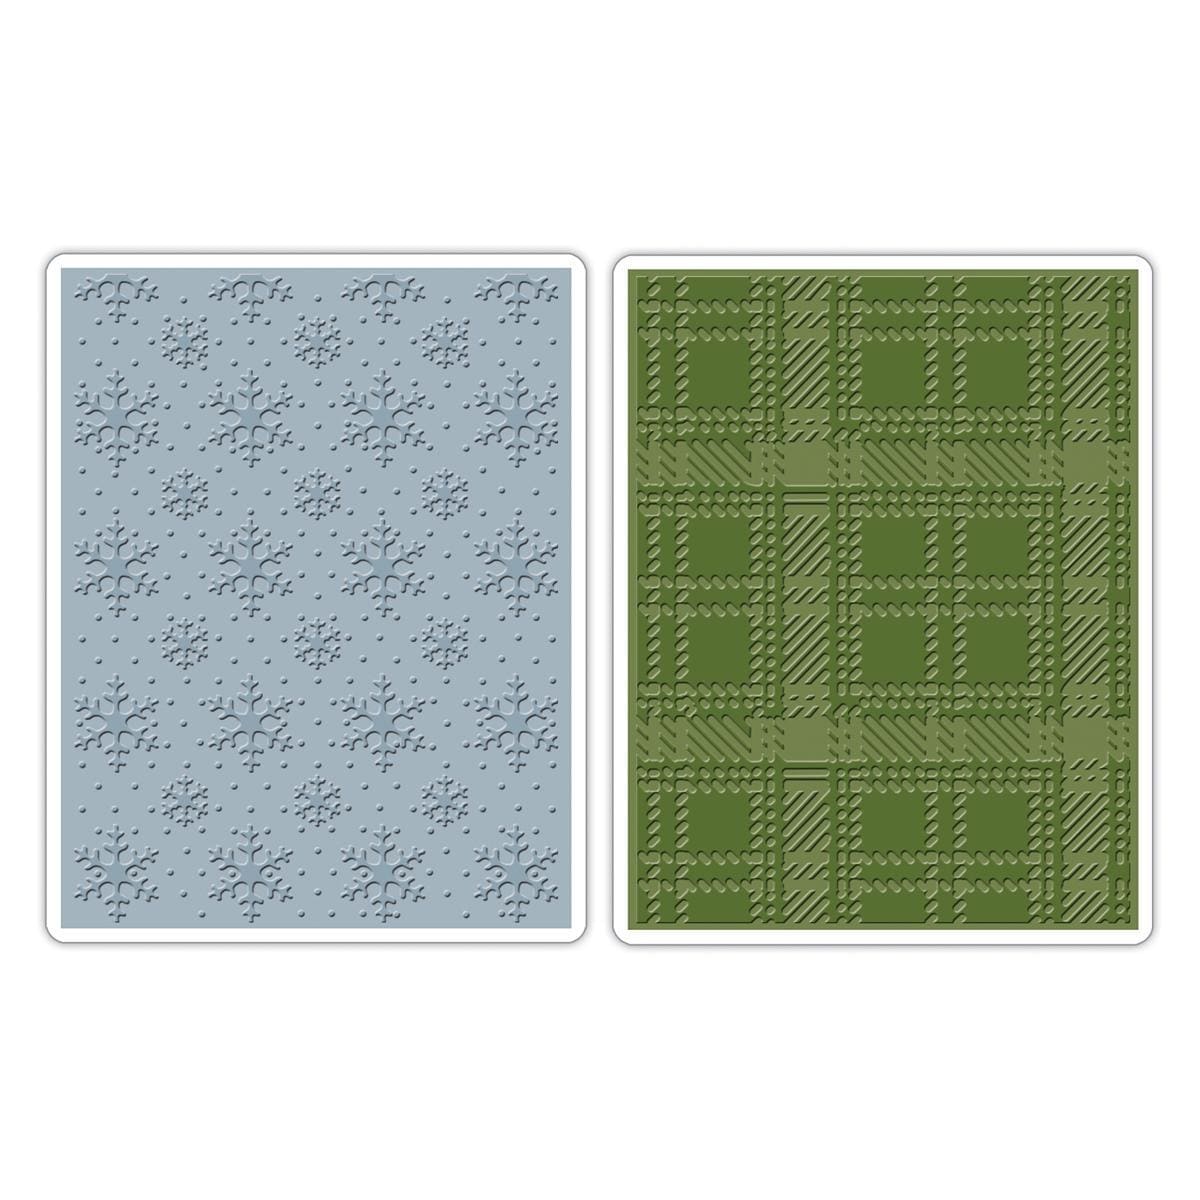 Sizzix Texture Fades A2 Embossing Folders 2/pkg   Snowflake   Plaid By Tim Holtz